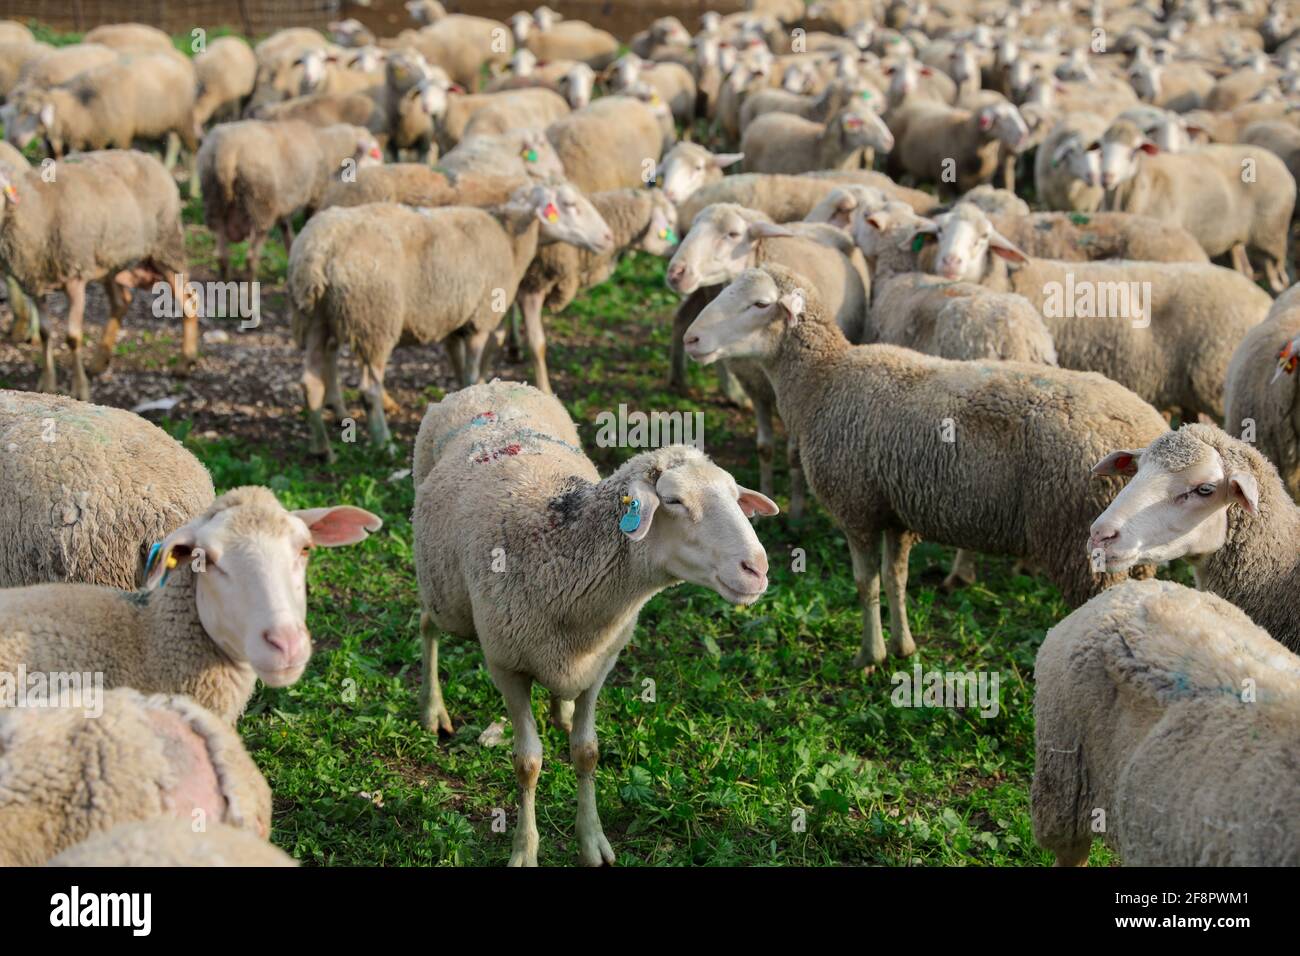 Herd of white sheep grazing in a Green landscape. Stock Photo